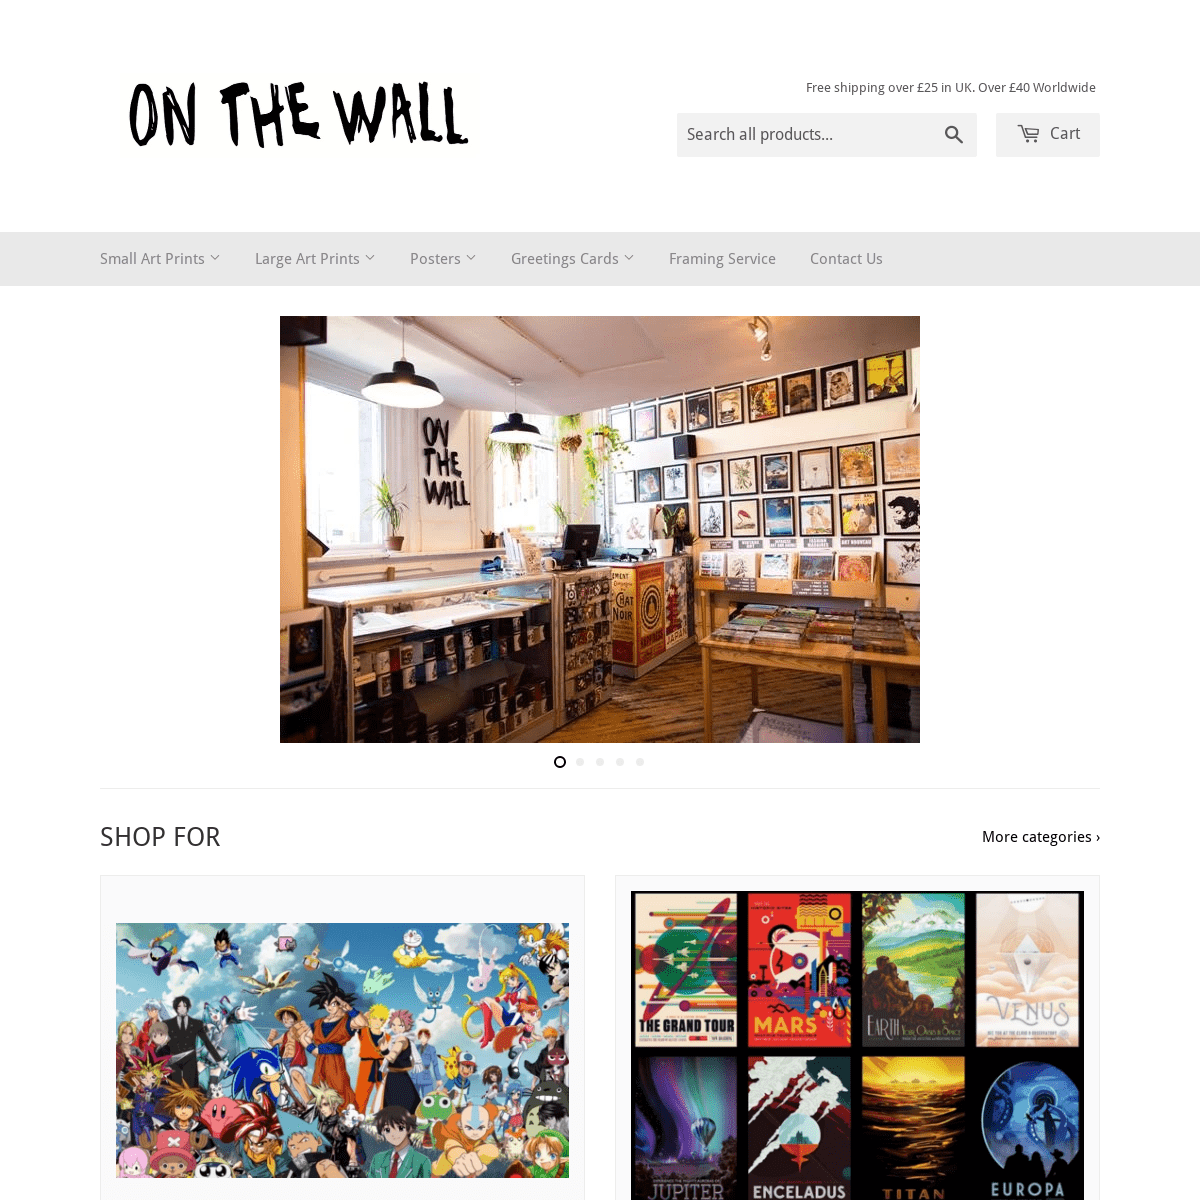 A complete backup of onthewall.co.uk